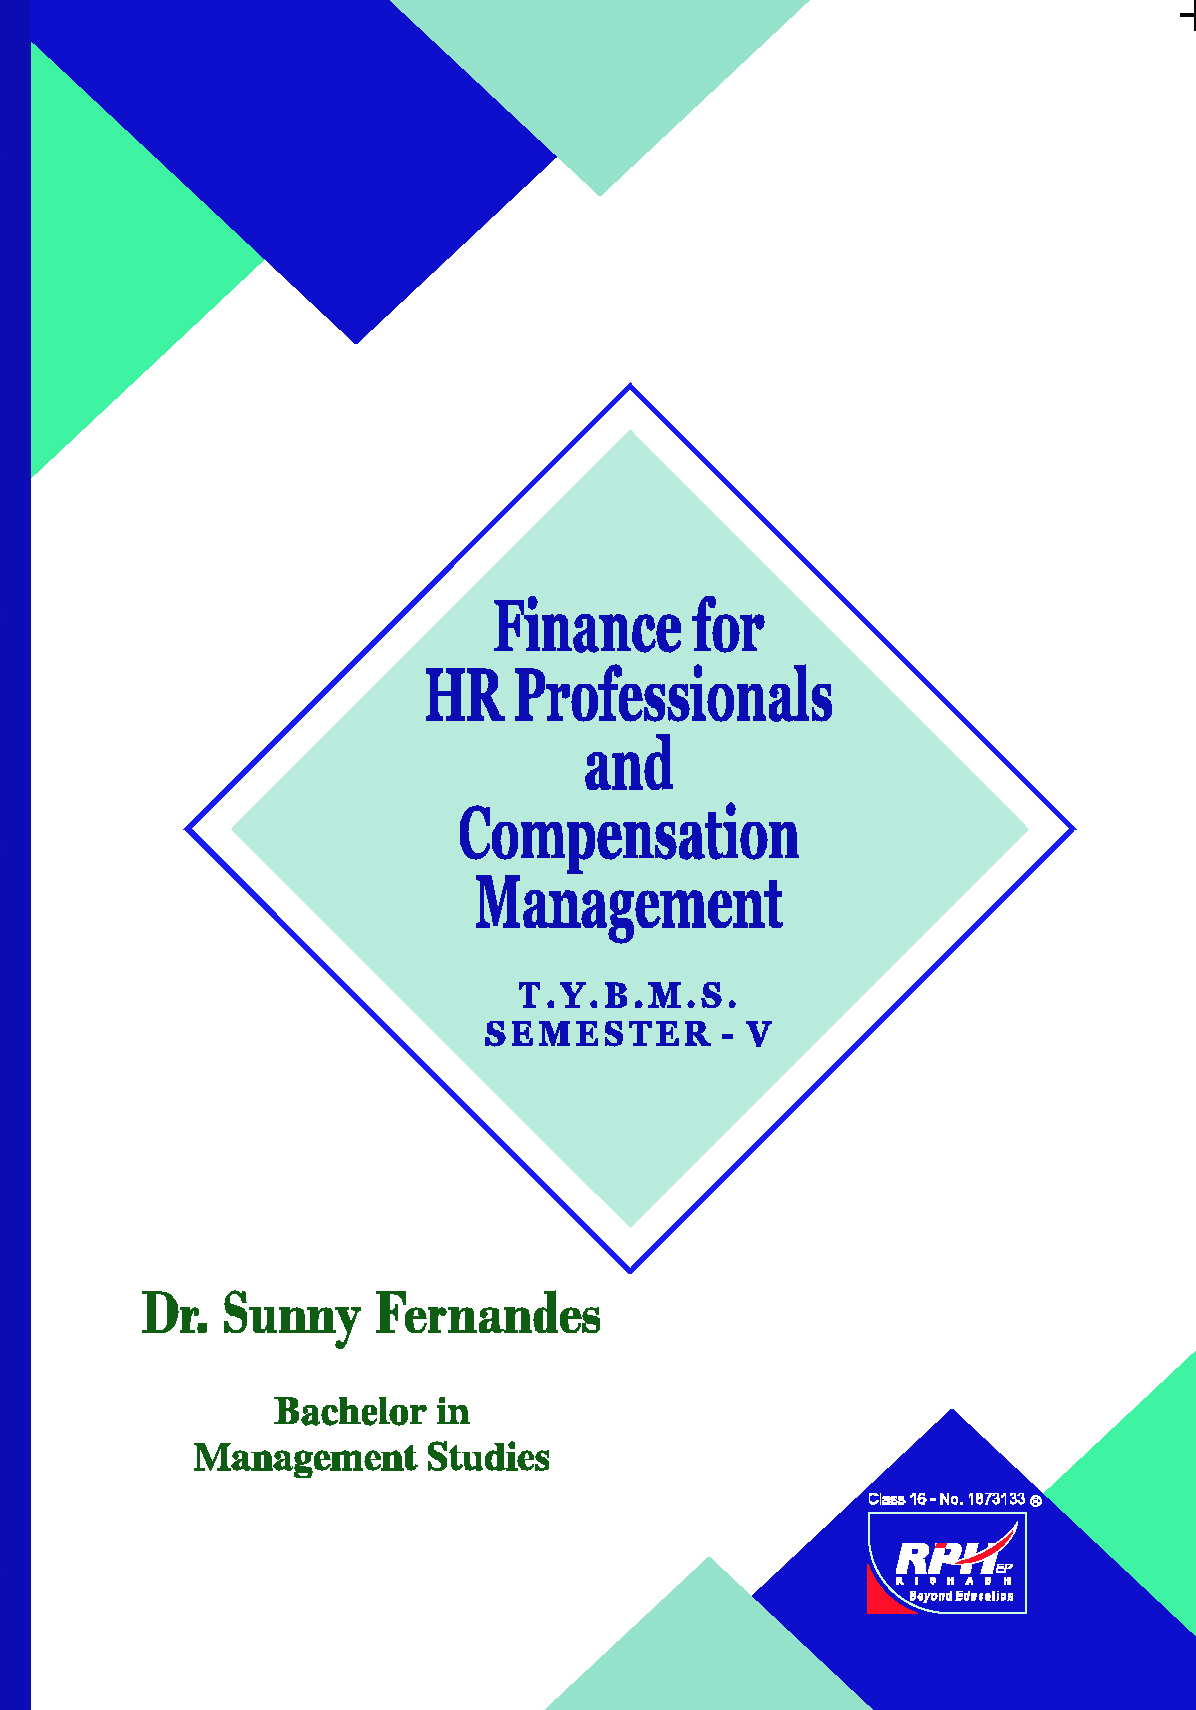 Fin for HR Pfoe and Compen Mg. – Front